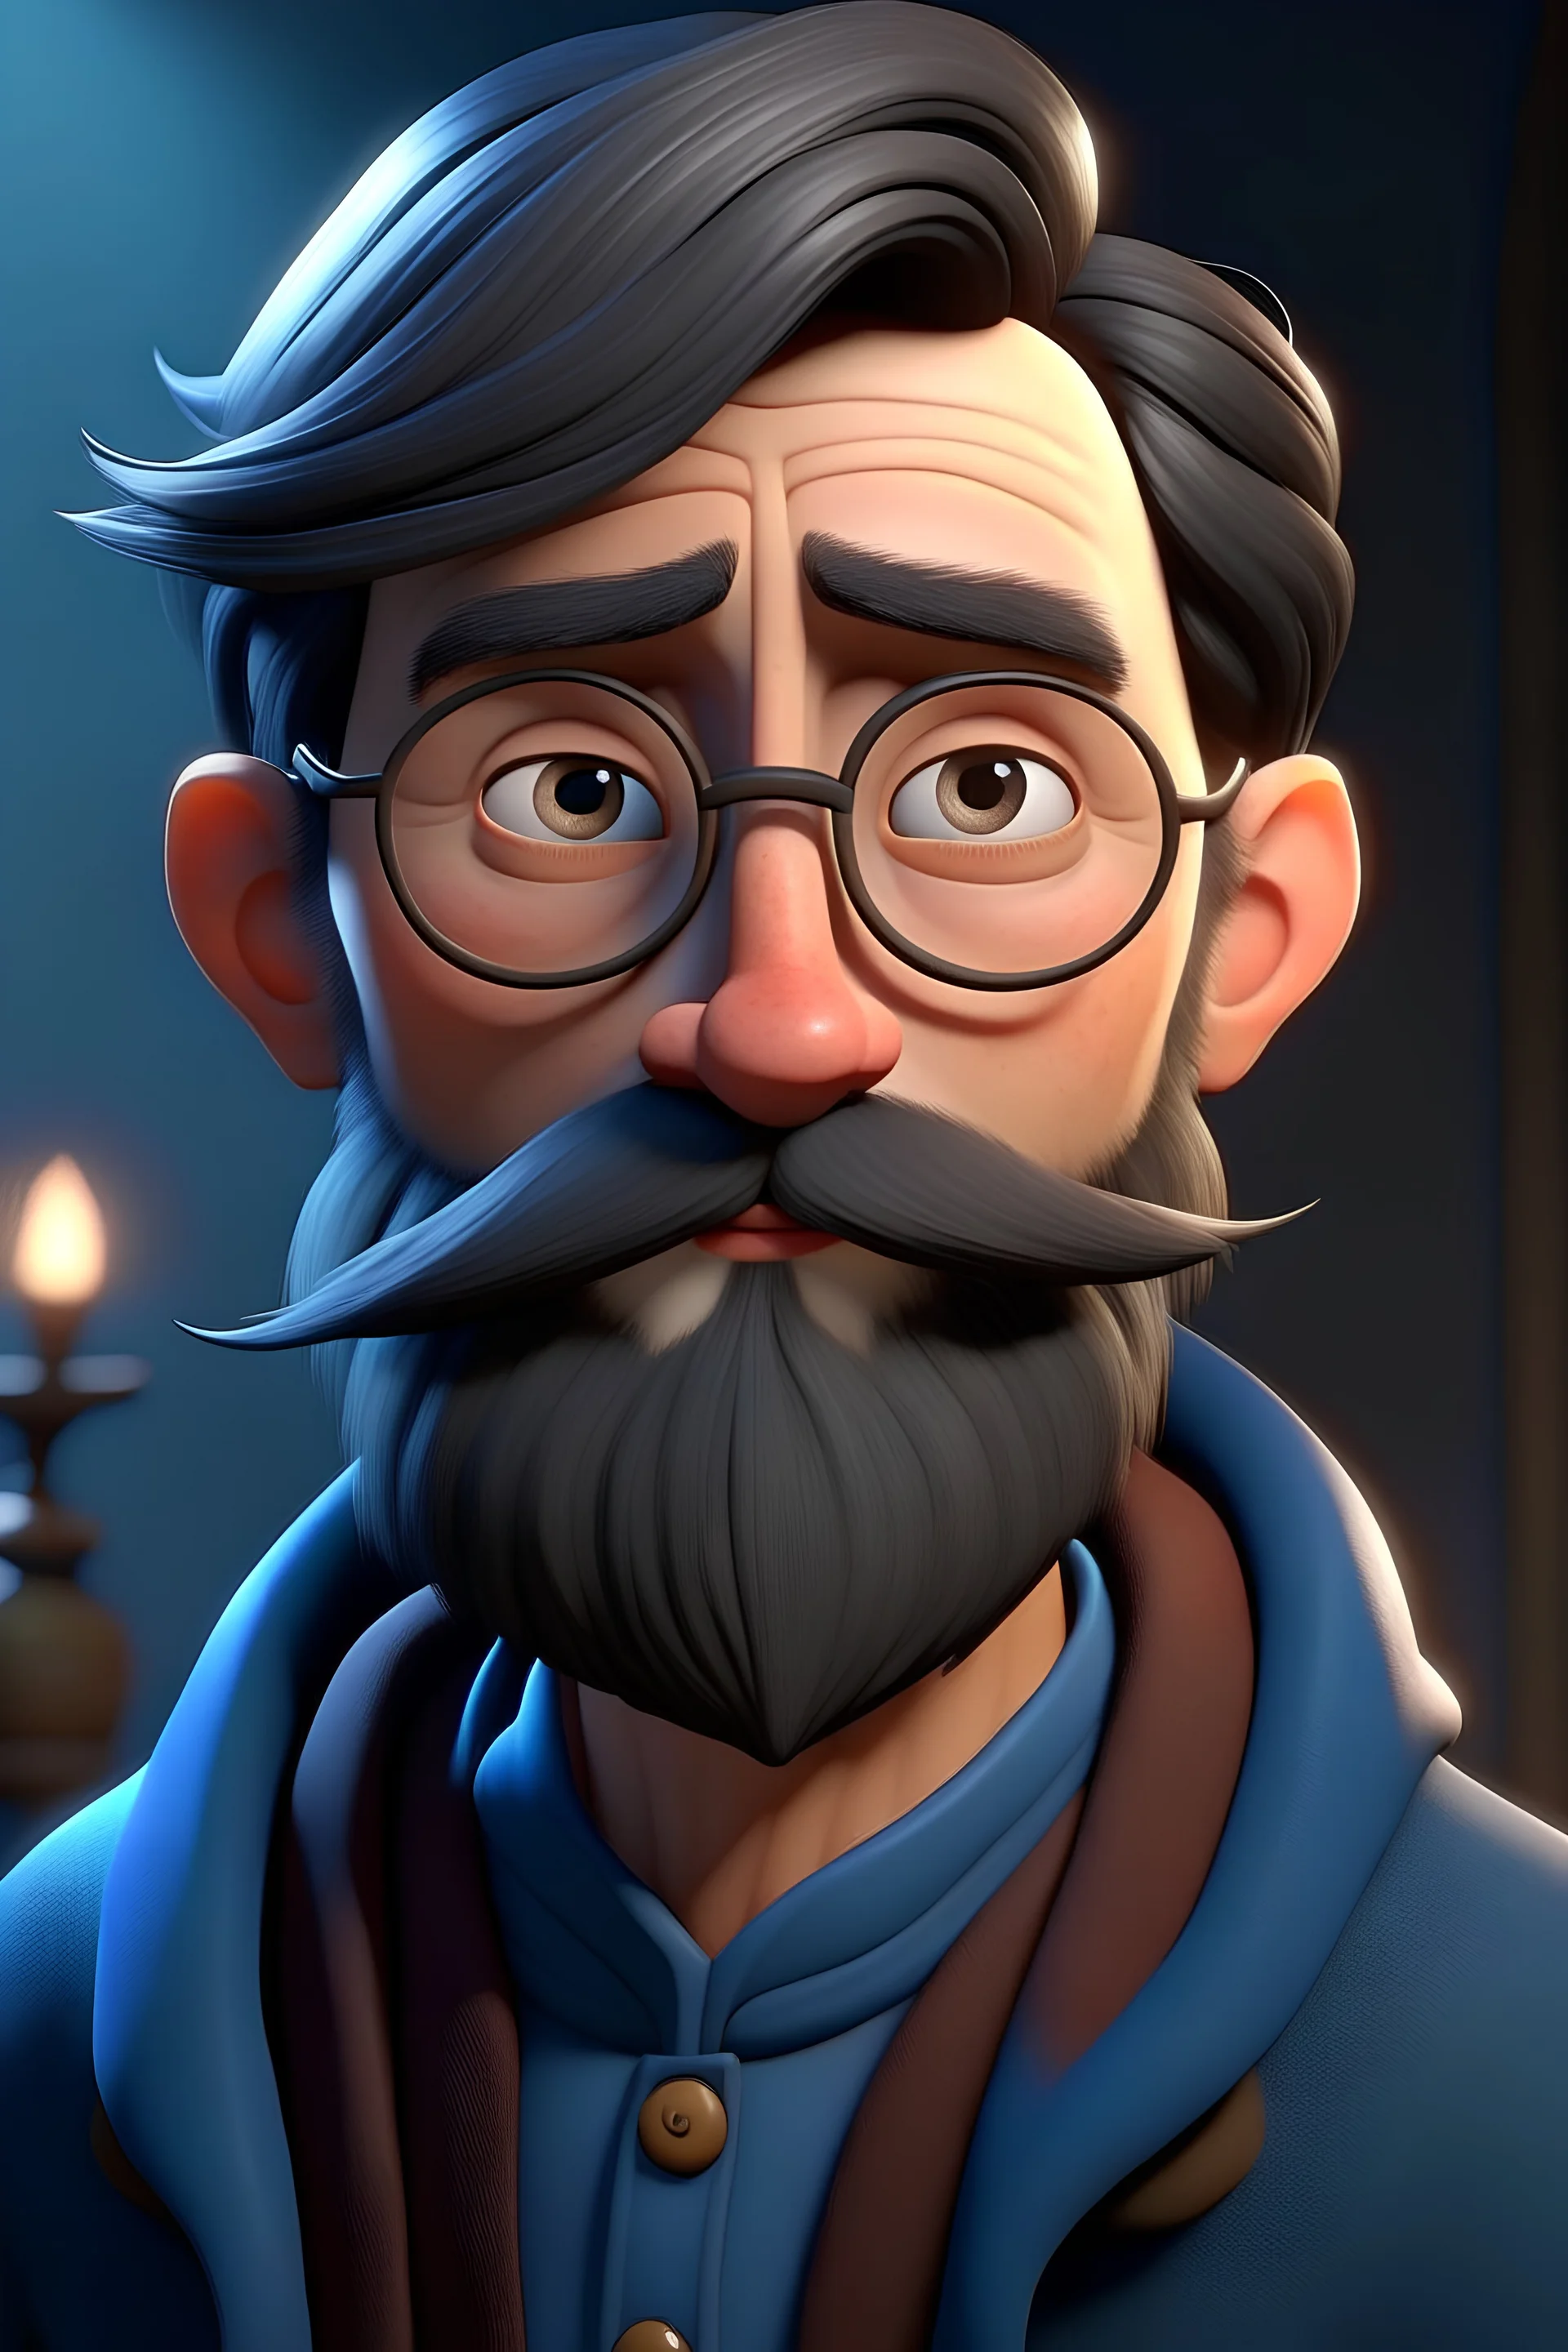 Generate a fully realistic Disney-style avatar in 4K resolution featuring a male character with large, expressive eyes and a kind facial expression. The character should be dressed as a wizard, complete with a beard and glasses. Pay attention to intricate details in the outfit, beard, and glasses to capture the whimsy and charm associated with Disney characters. Emphasize a sense of magic and wonder in both the facial expression and the wizard attire. Ensure that the eyes are captivating and con